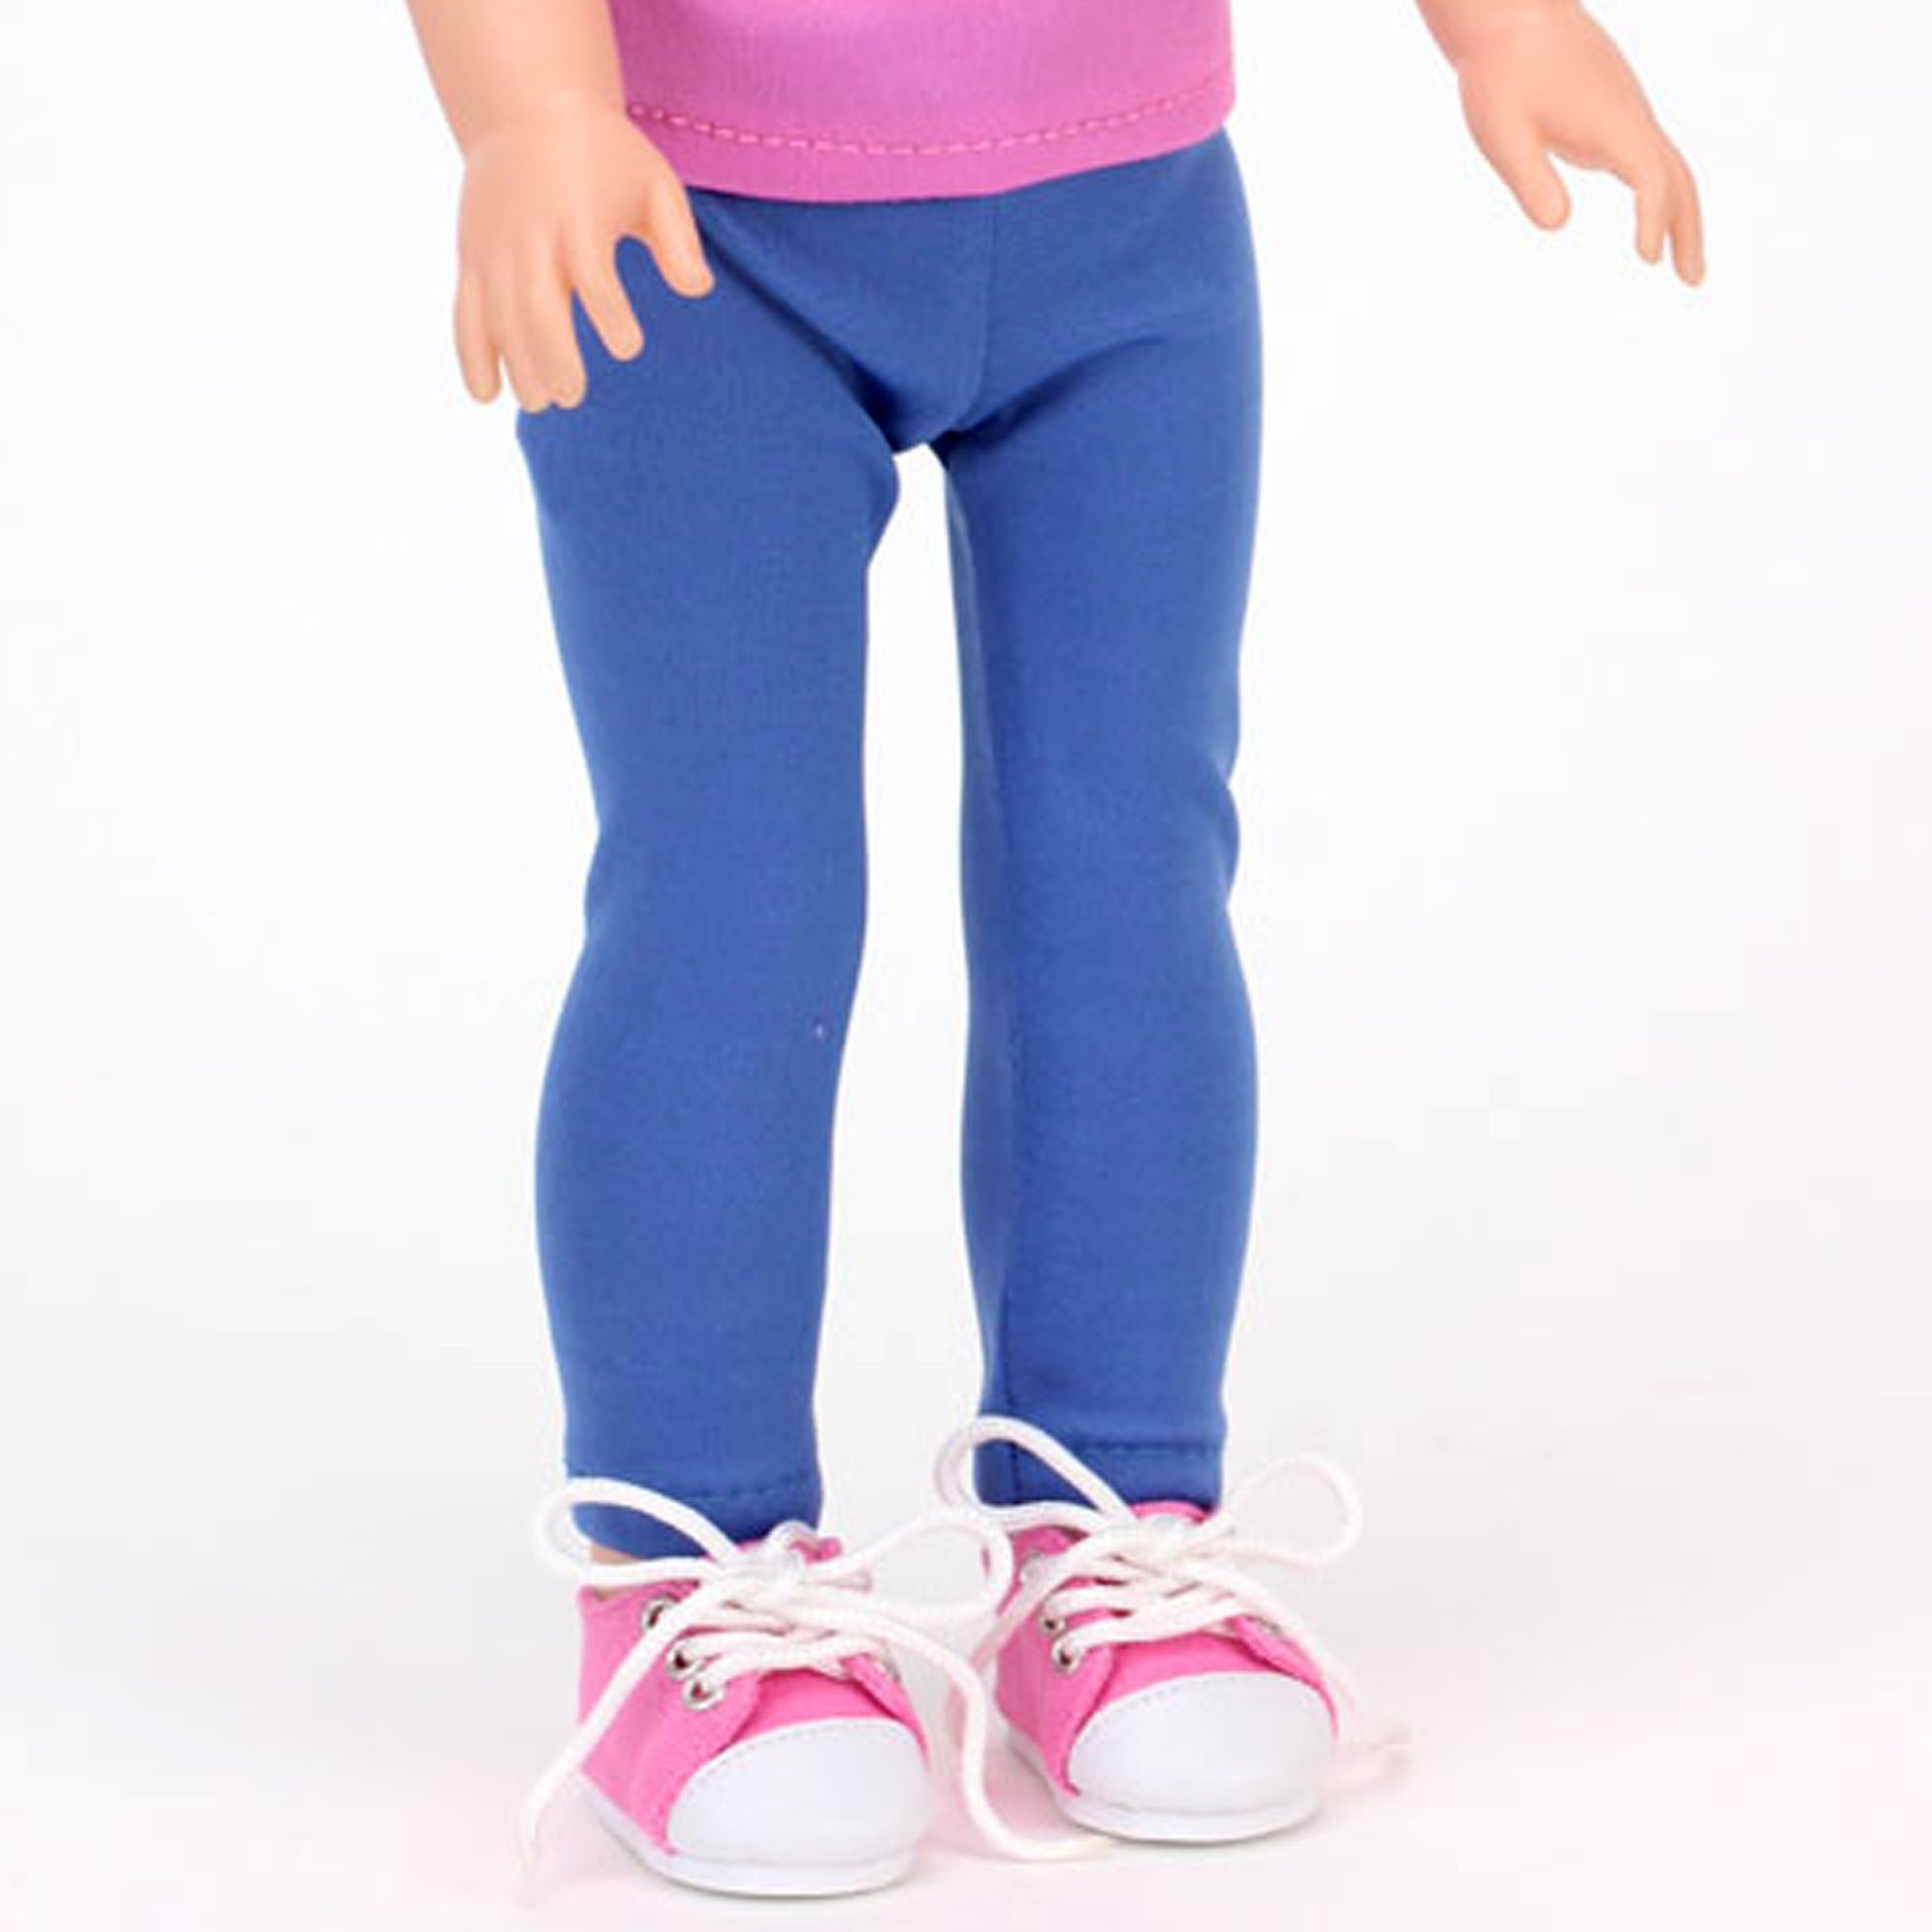 Sophia's Dressy Black Flats and Pink Sneakers for 14.5" Dolls